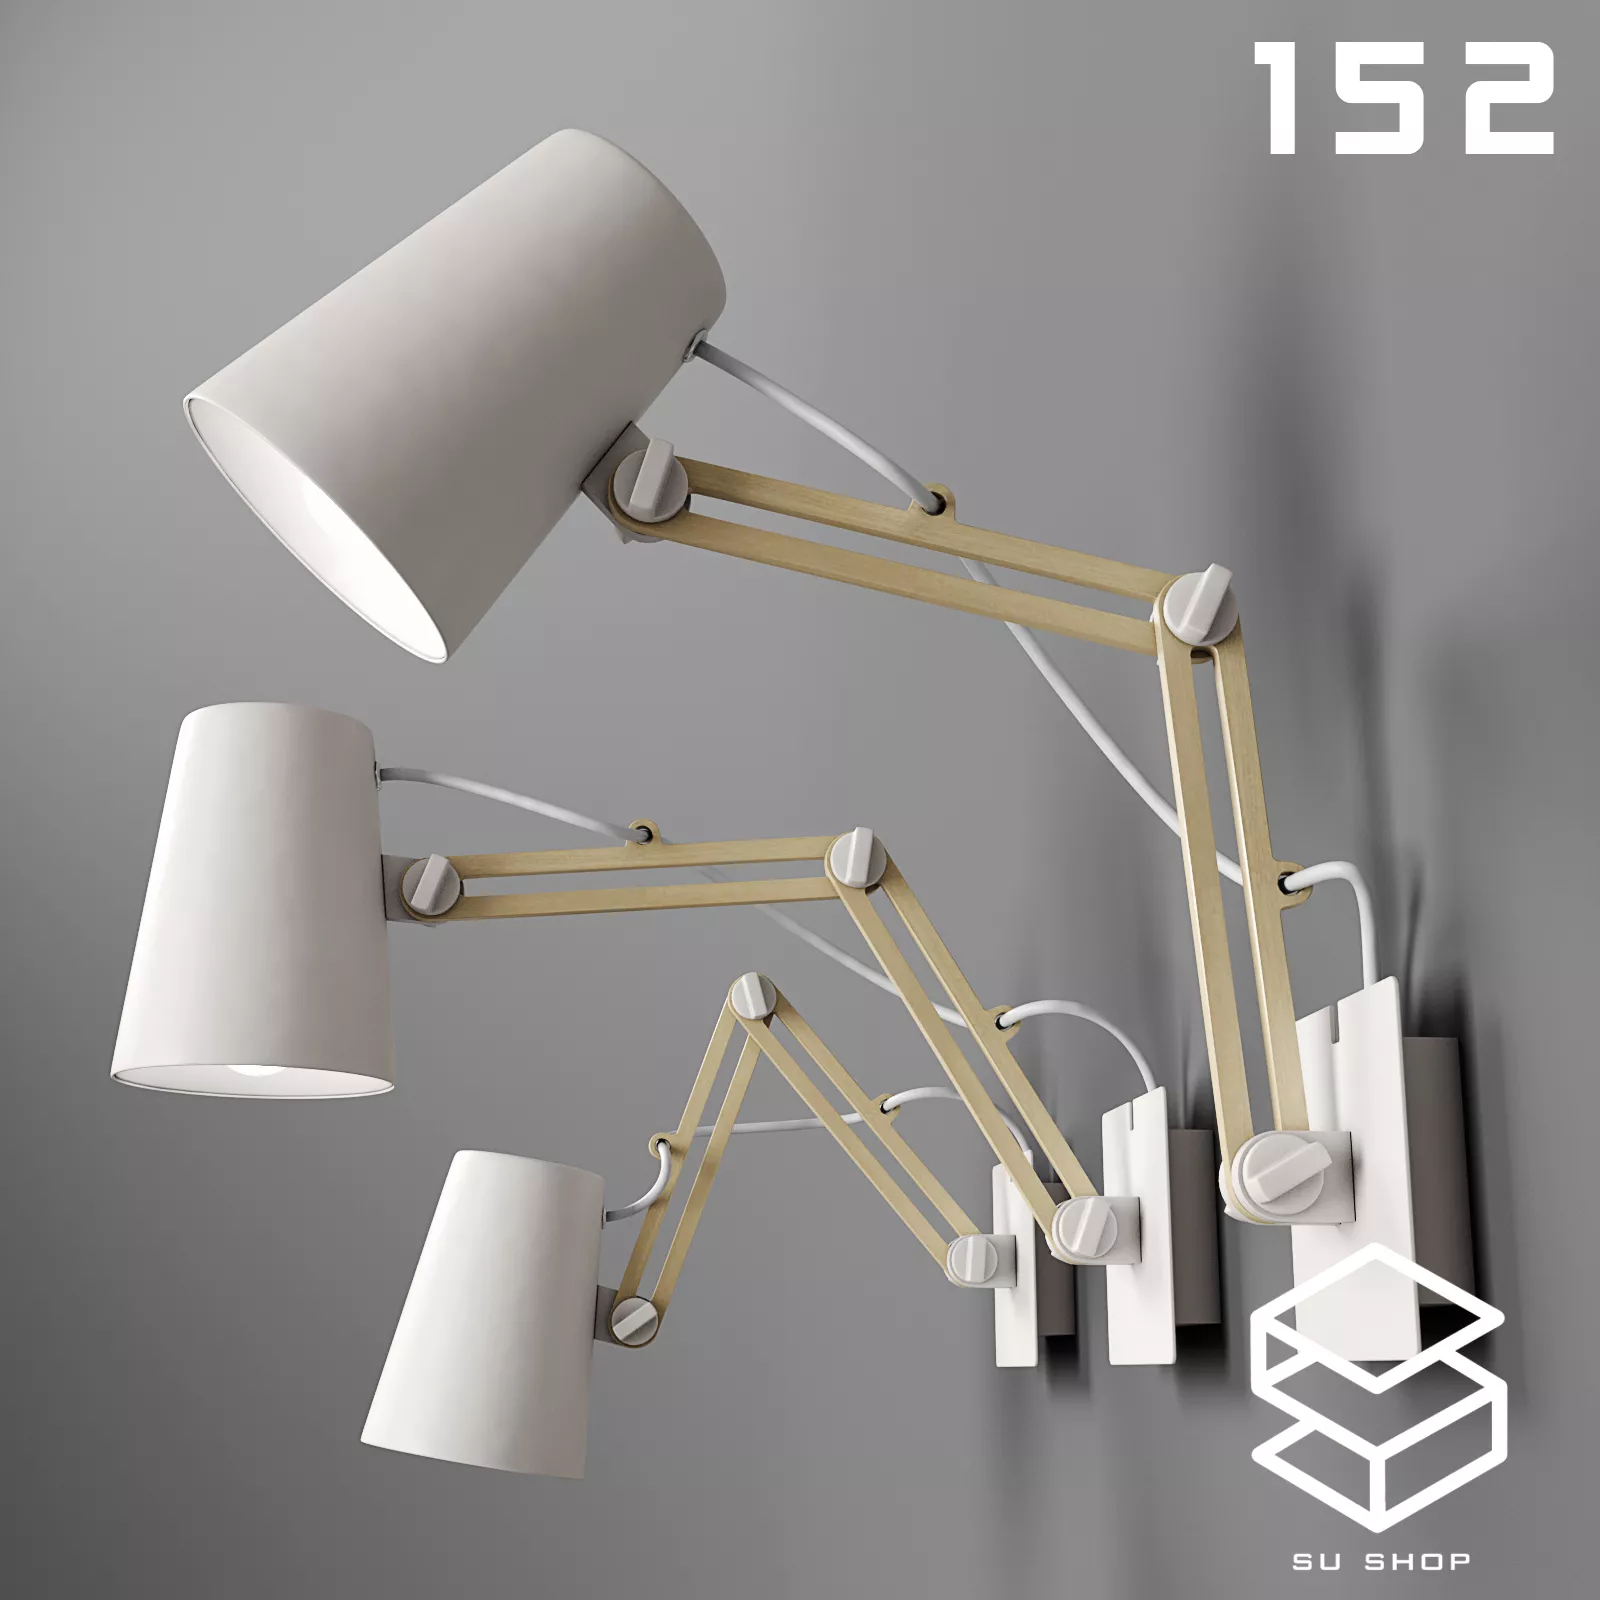 MODERN WALL LAMP - SKETCHUP 3D MODEL - VRAY OR ENSCAPE - ID16167